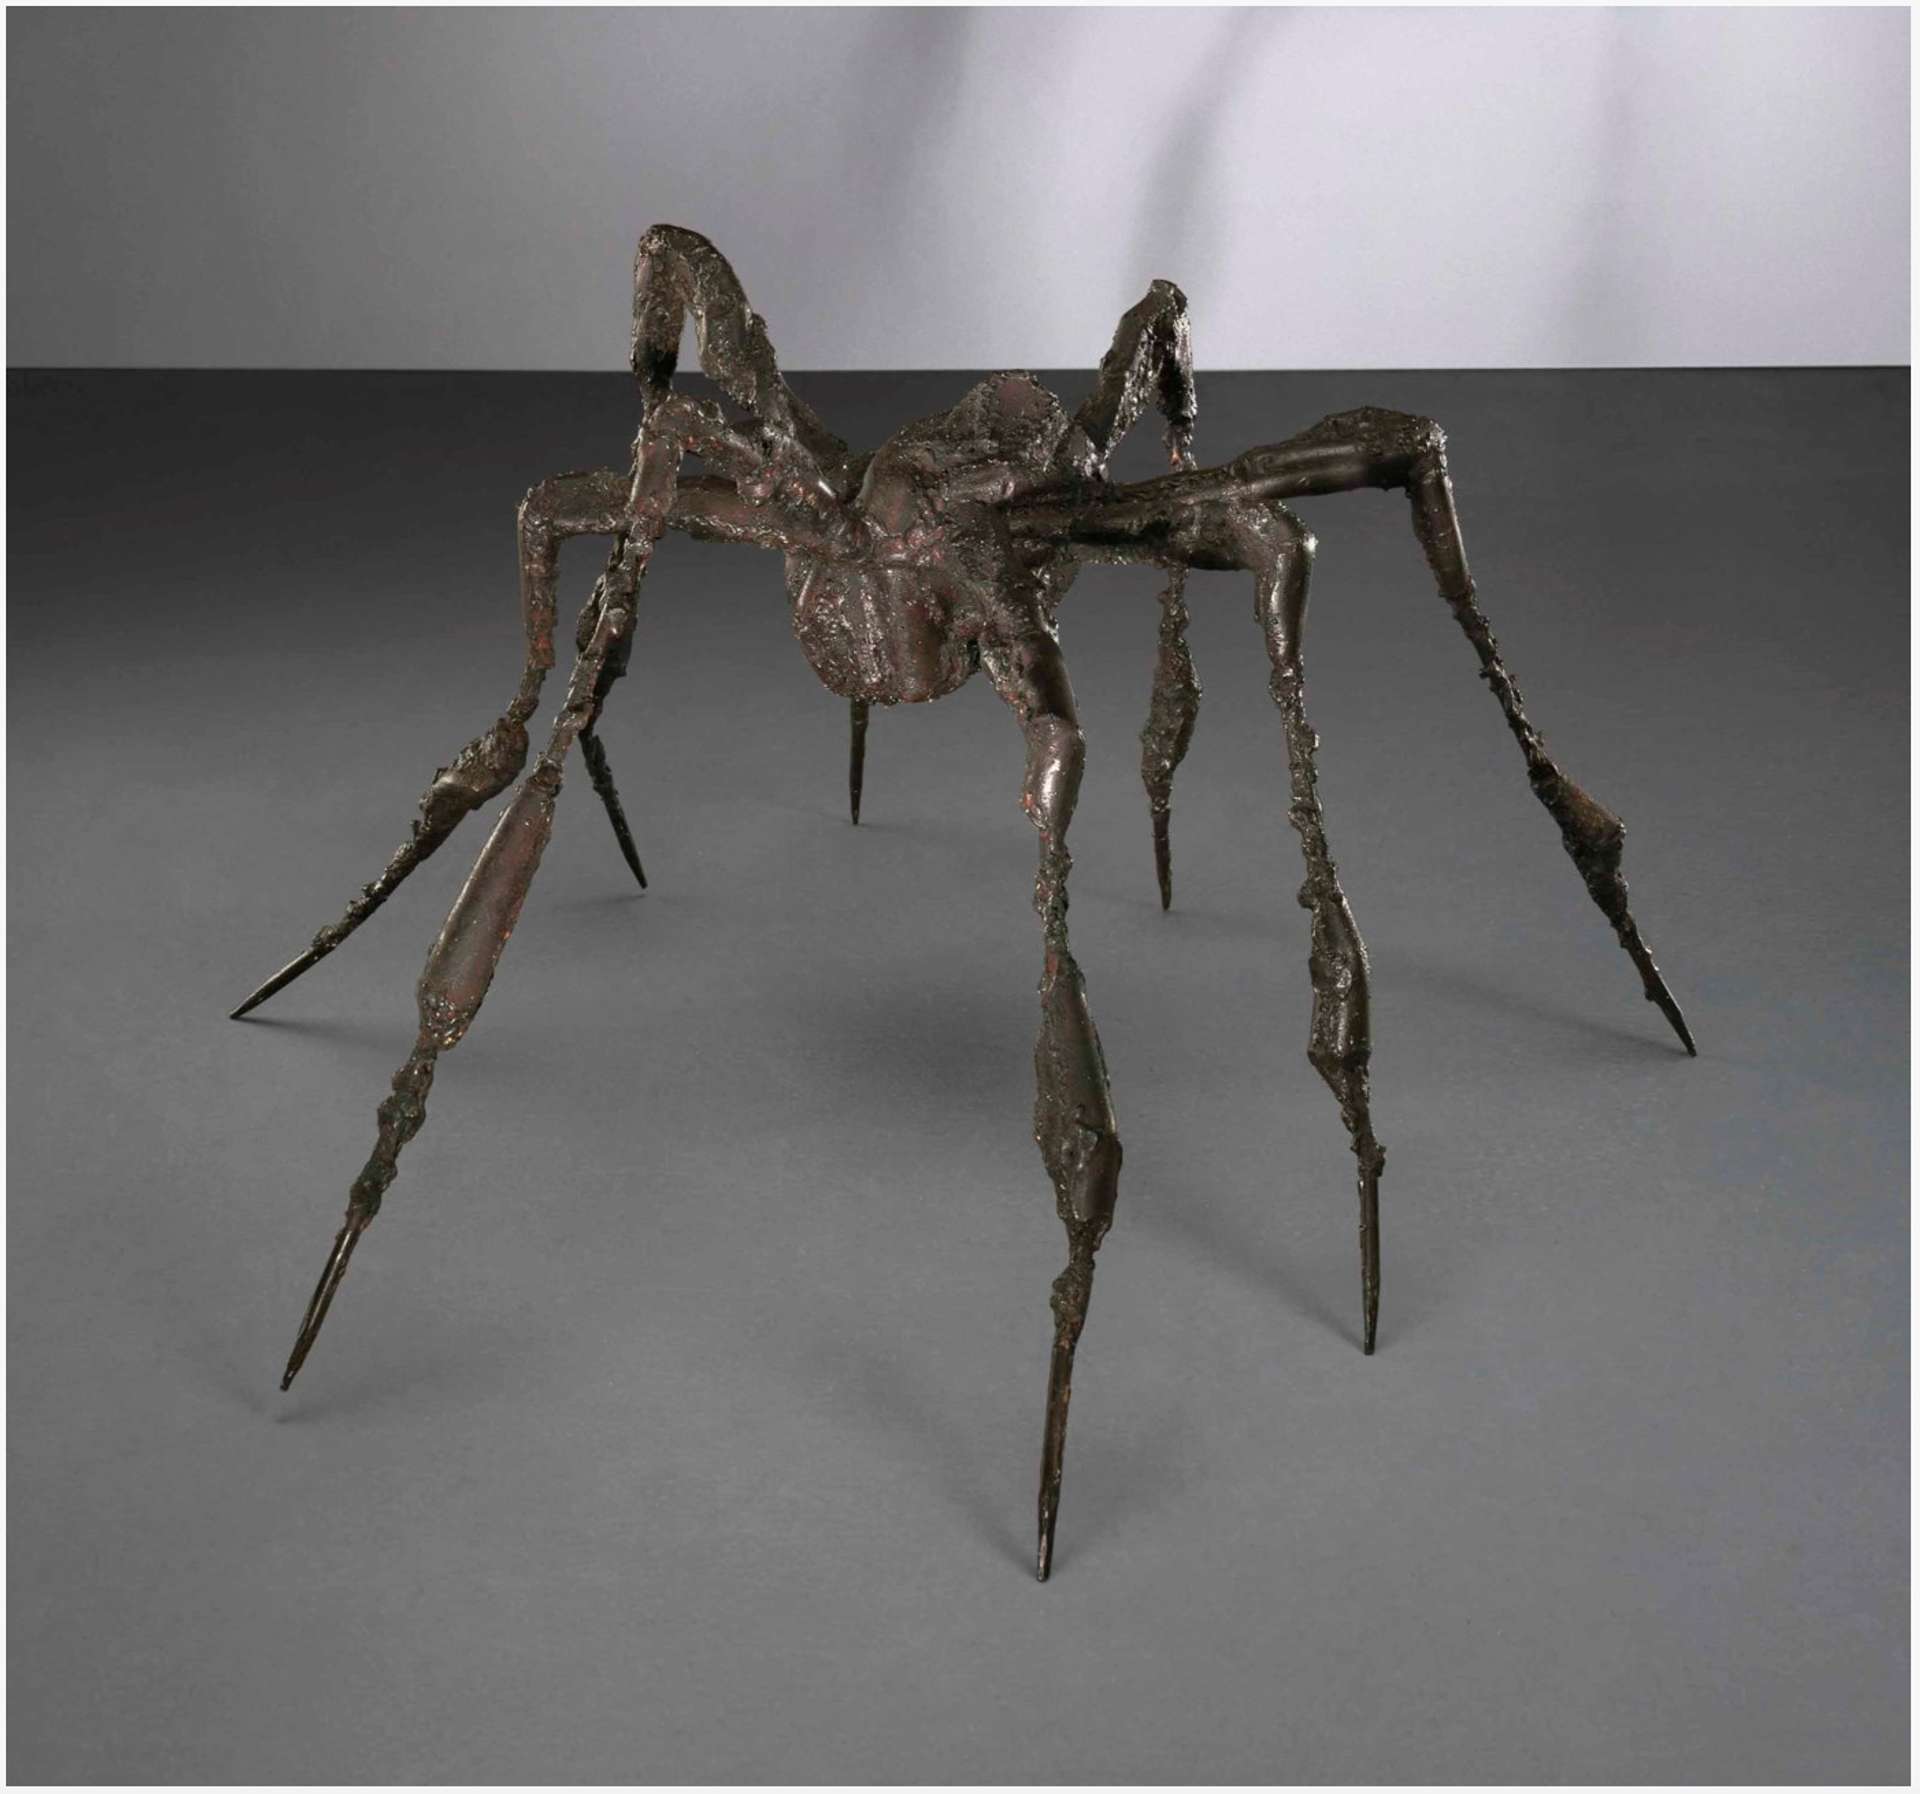 A steel spider sculpture with a robust body resting on the ground, its eight sturdy limbs balanced delicately on their tips, creating a static and stable pose.